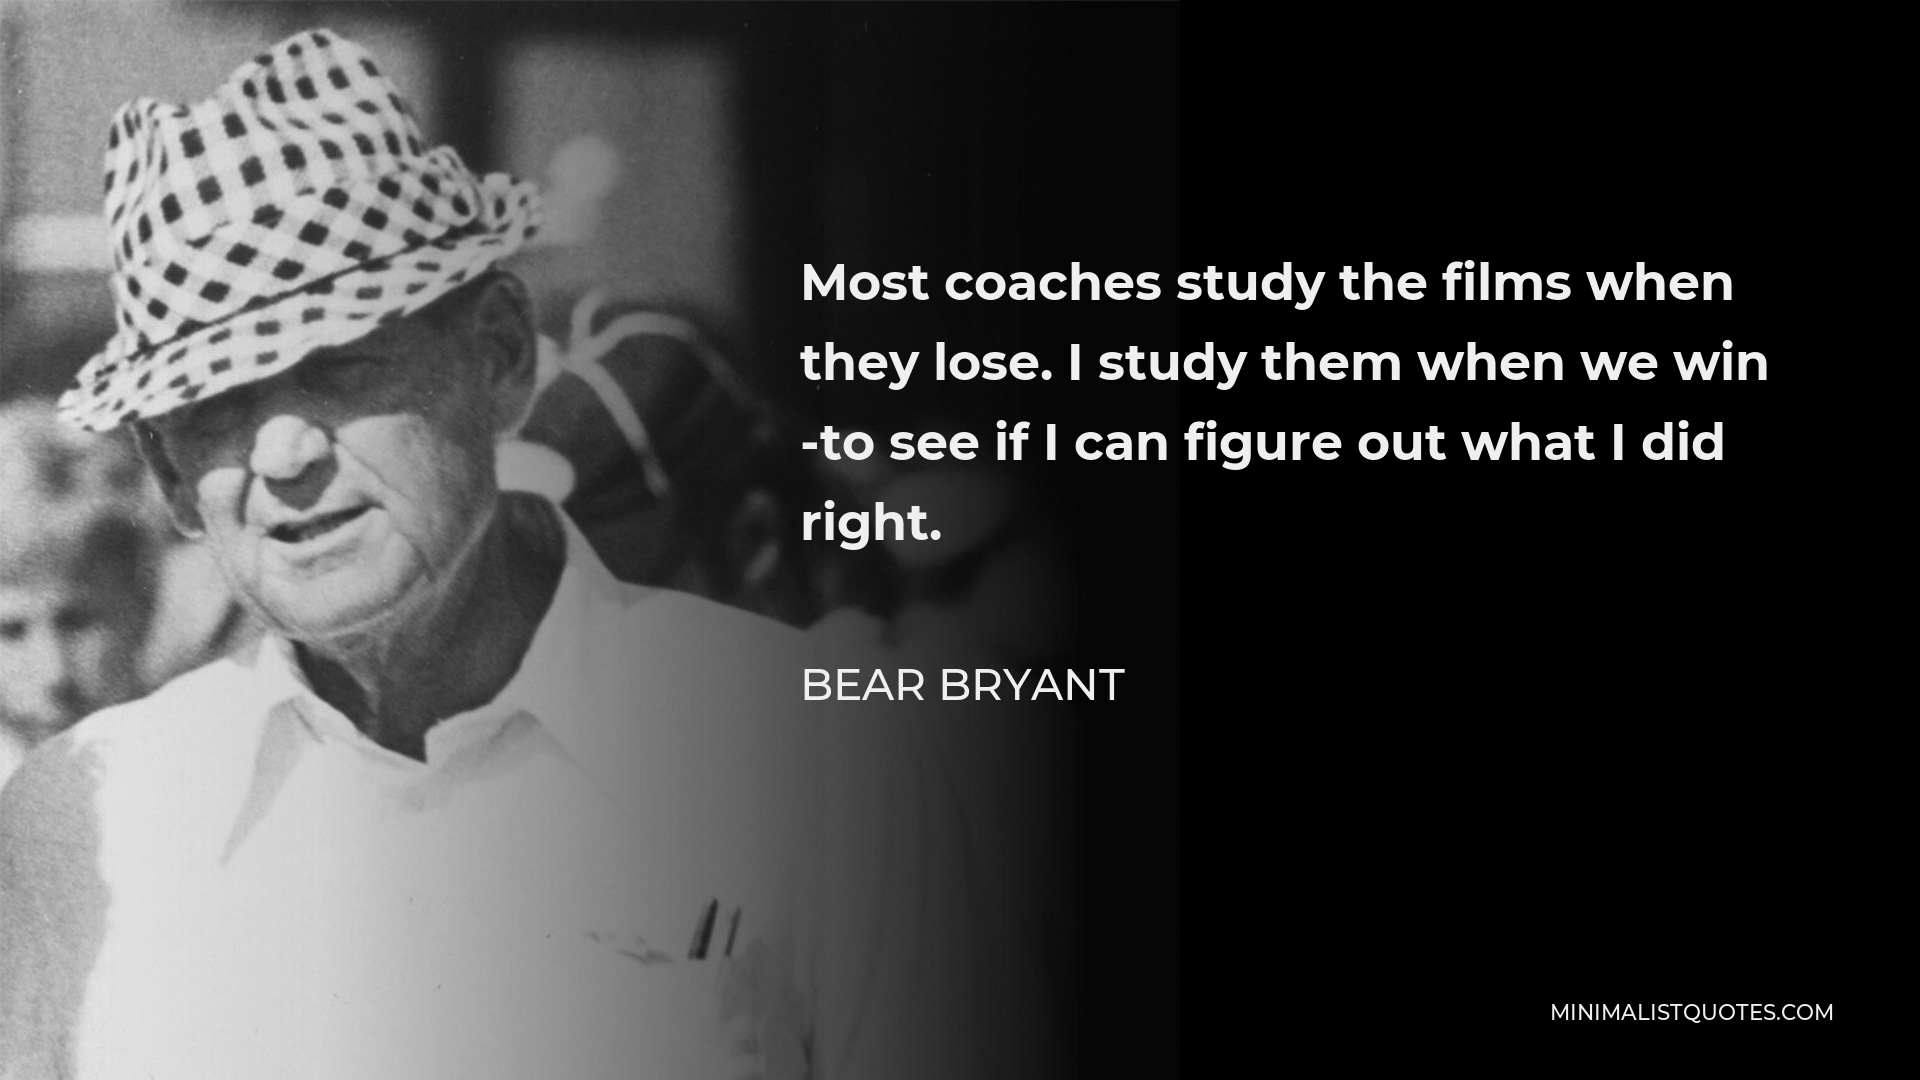 Bear Bryant Quote - Most coaches study the films when they lose. I study them when we win -to see if I can figure out what I did right.